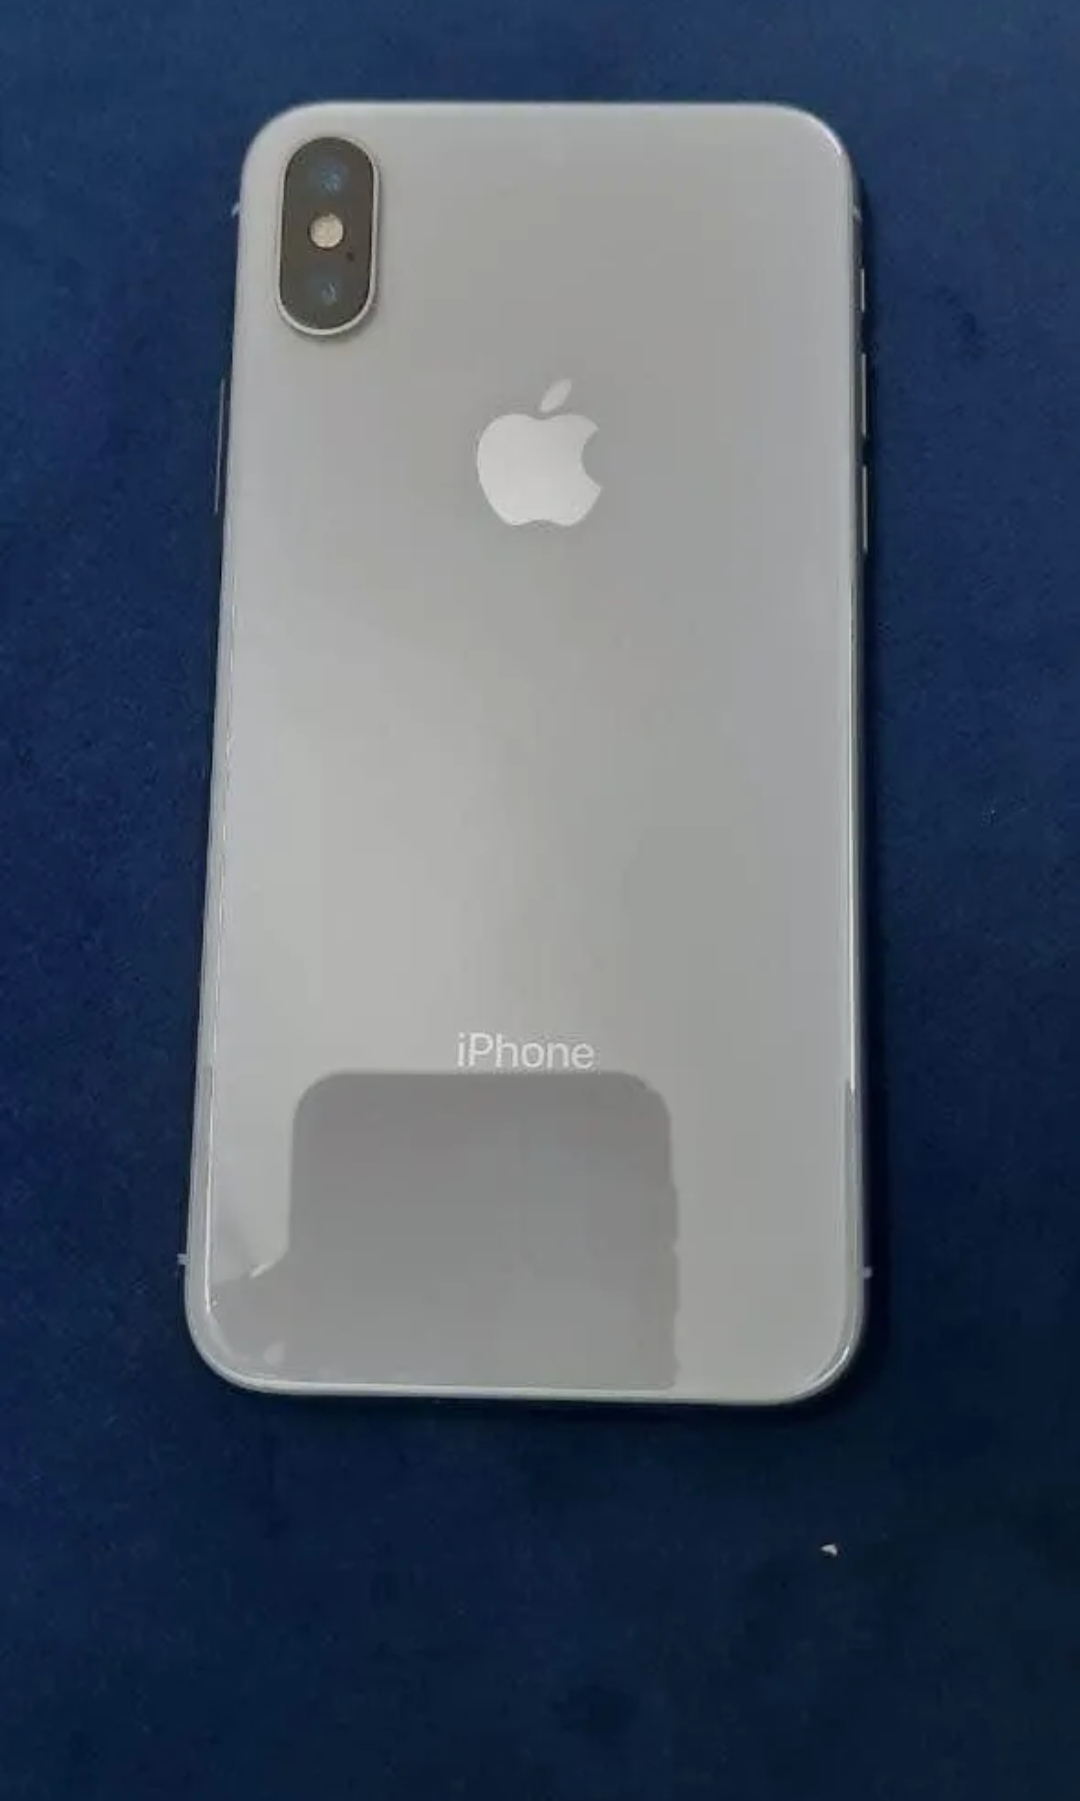 Details View - I phone x photos - reseller,reseller marketplace,advetising your products,reseller bazzar,resellerbazzar.in,india's classified site,I phone x